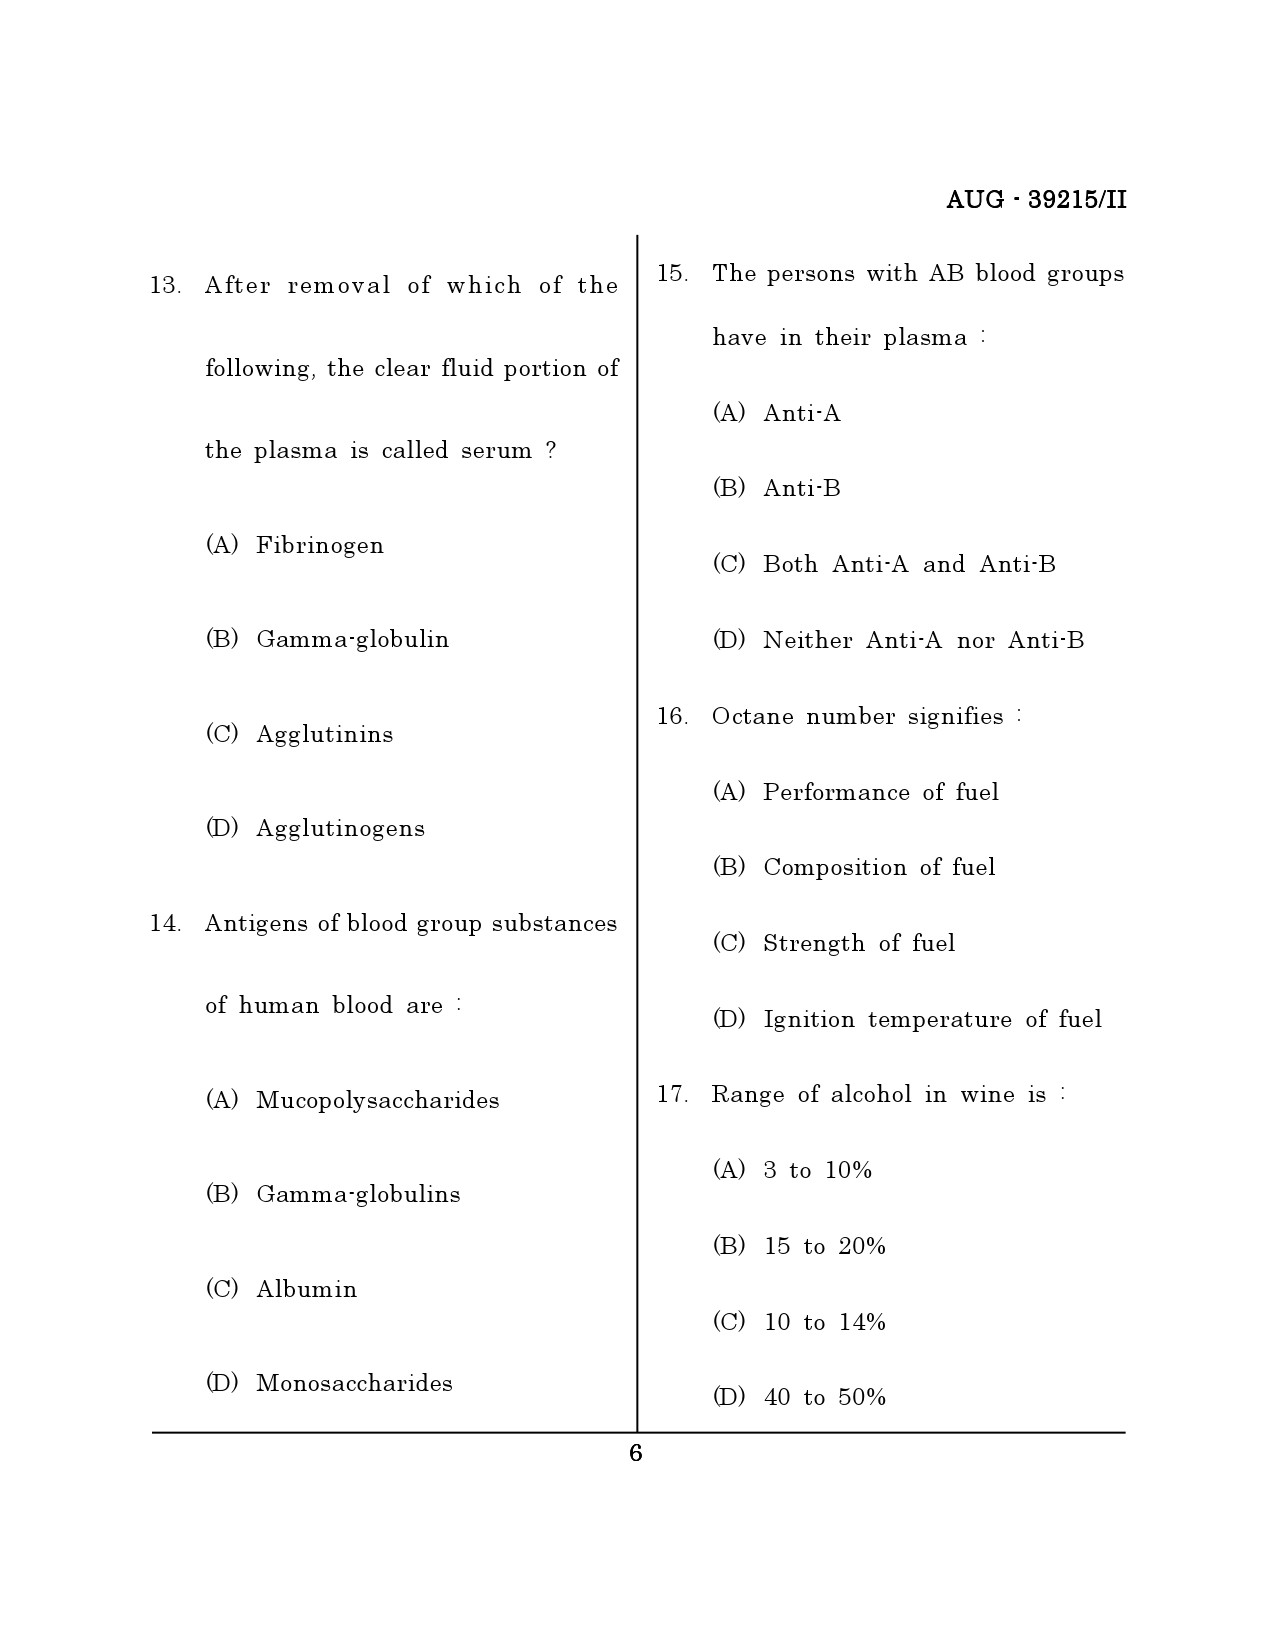 Maharashtra SET Forensic Science Question Paper II August 2015 5